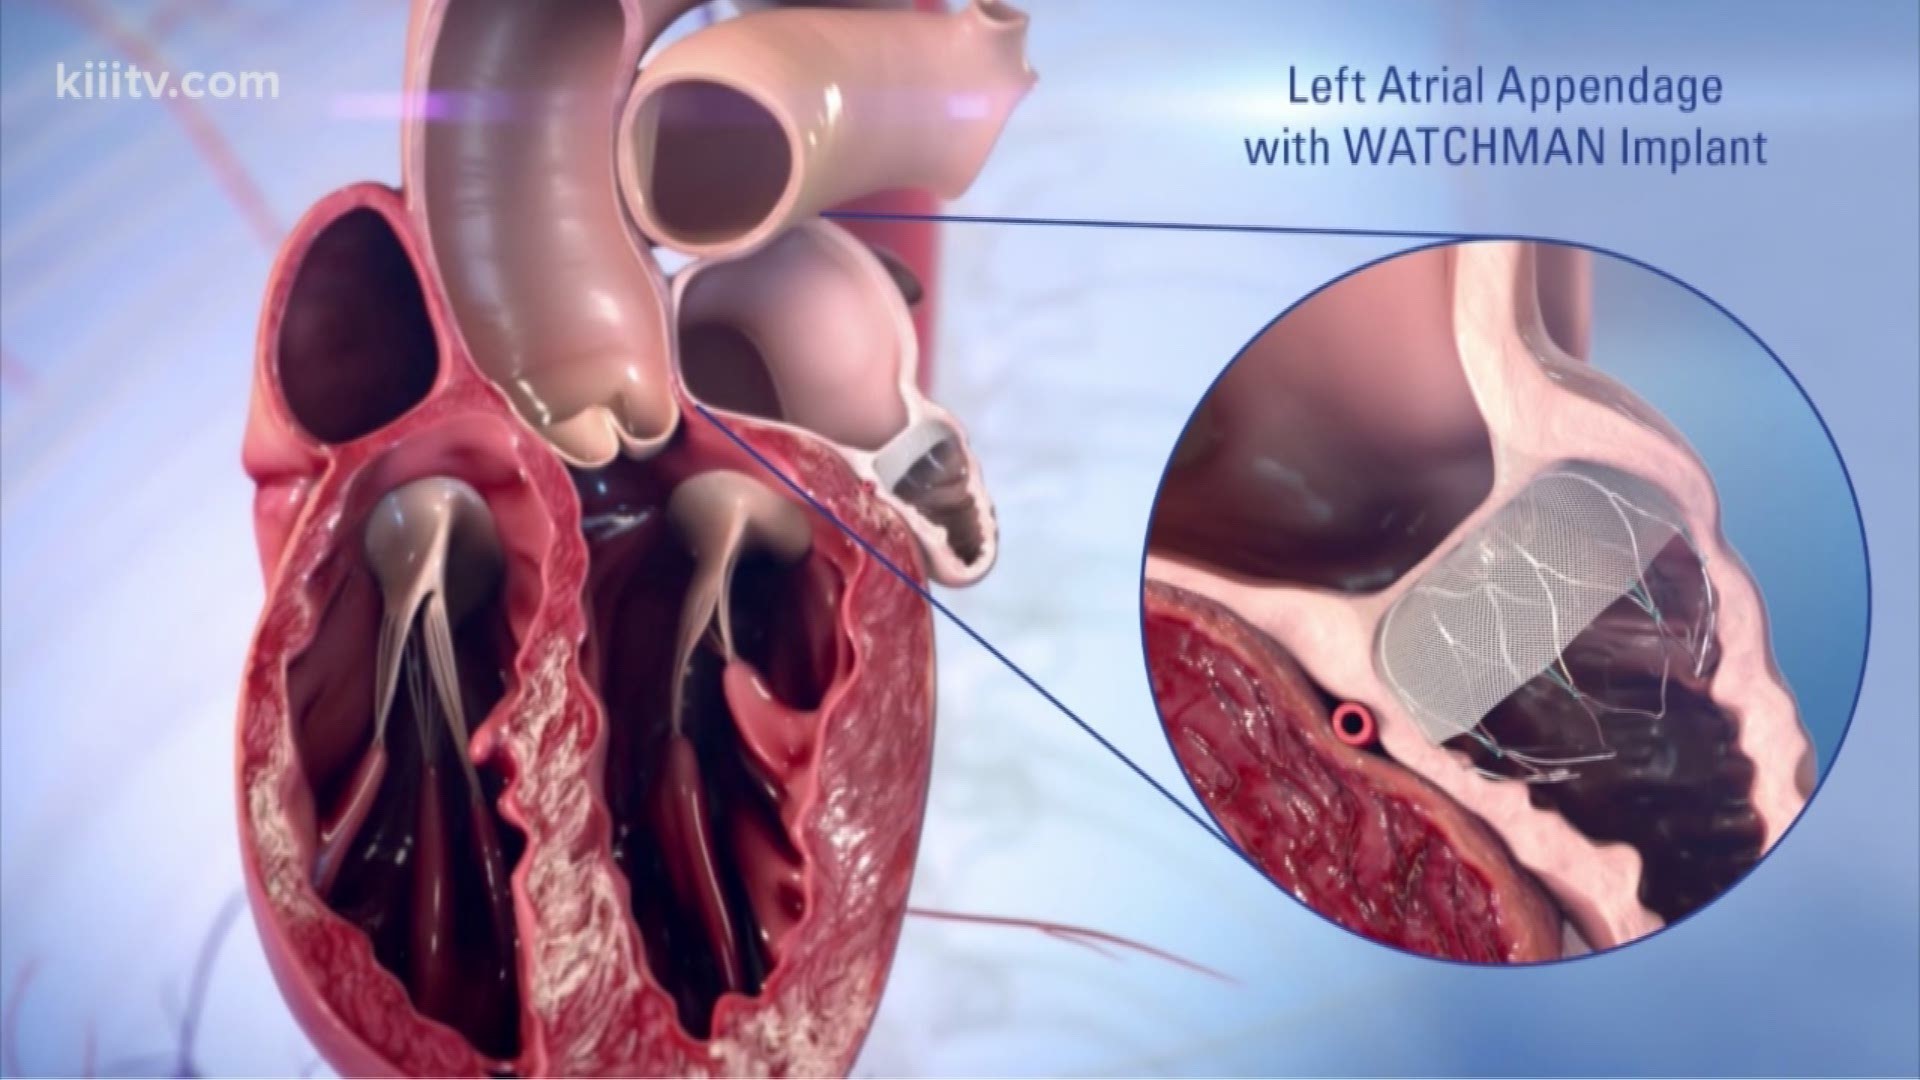 The watchman device is a left atrial appendage occlusion device that allows people in atrial fibrillation to stop anticoagulants; medicines that not everybody can tolerate.